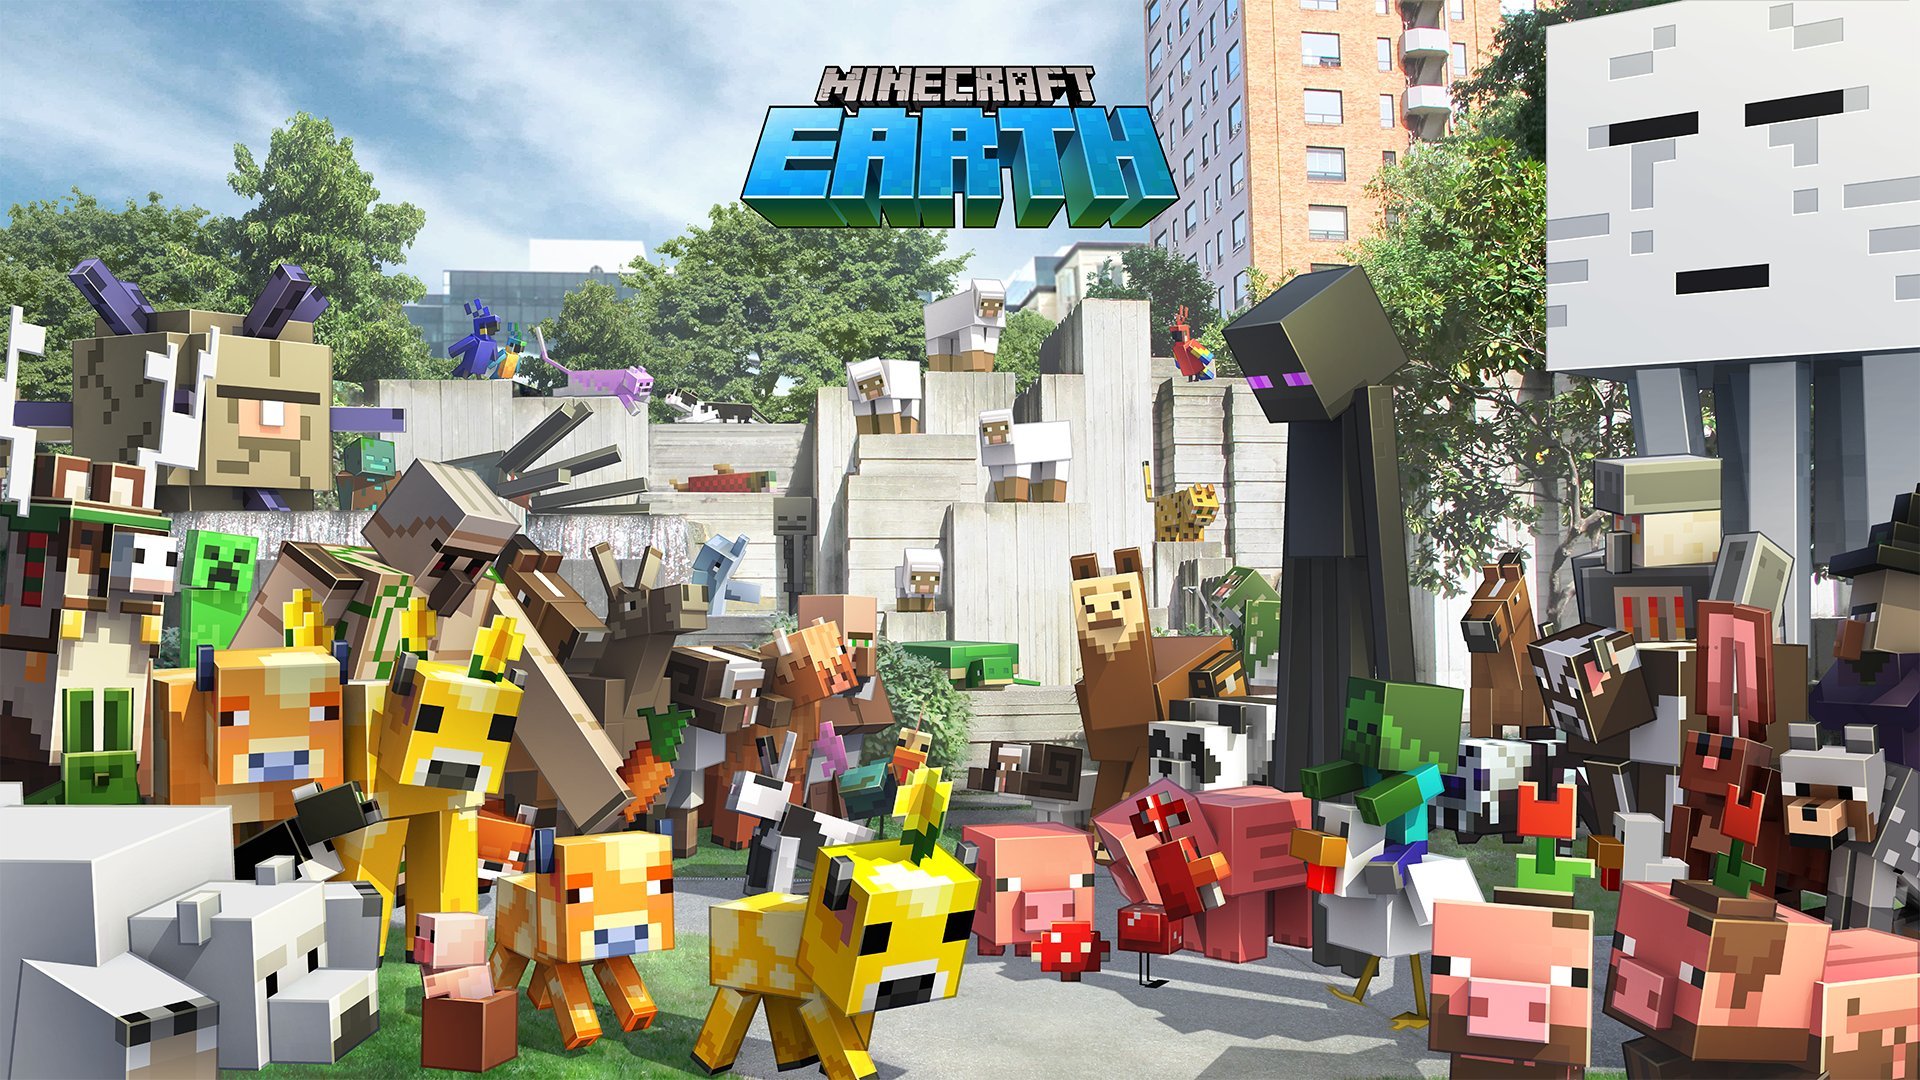 Is Minecraft Earth gone?